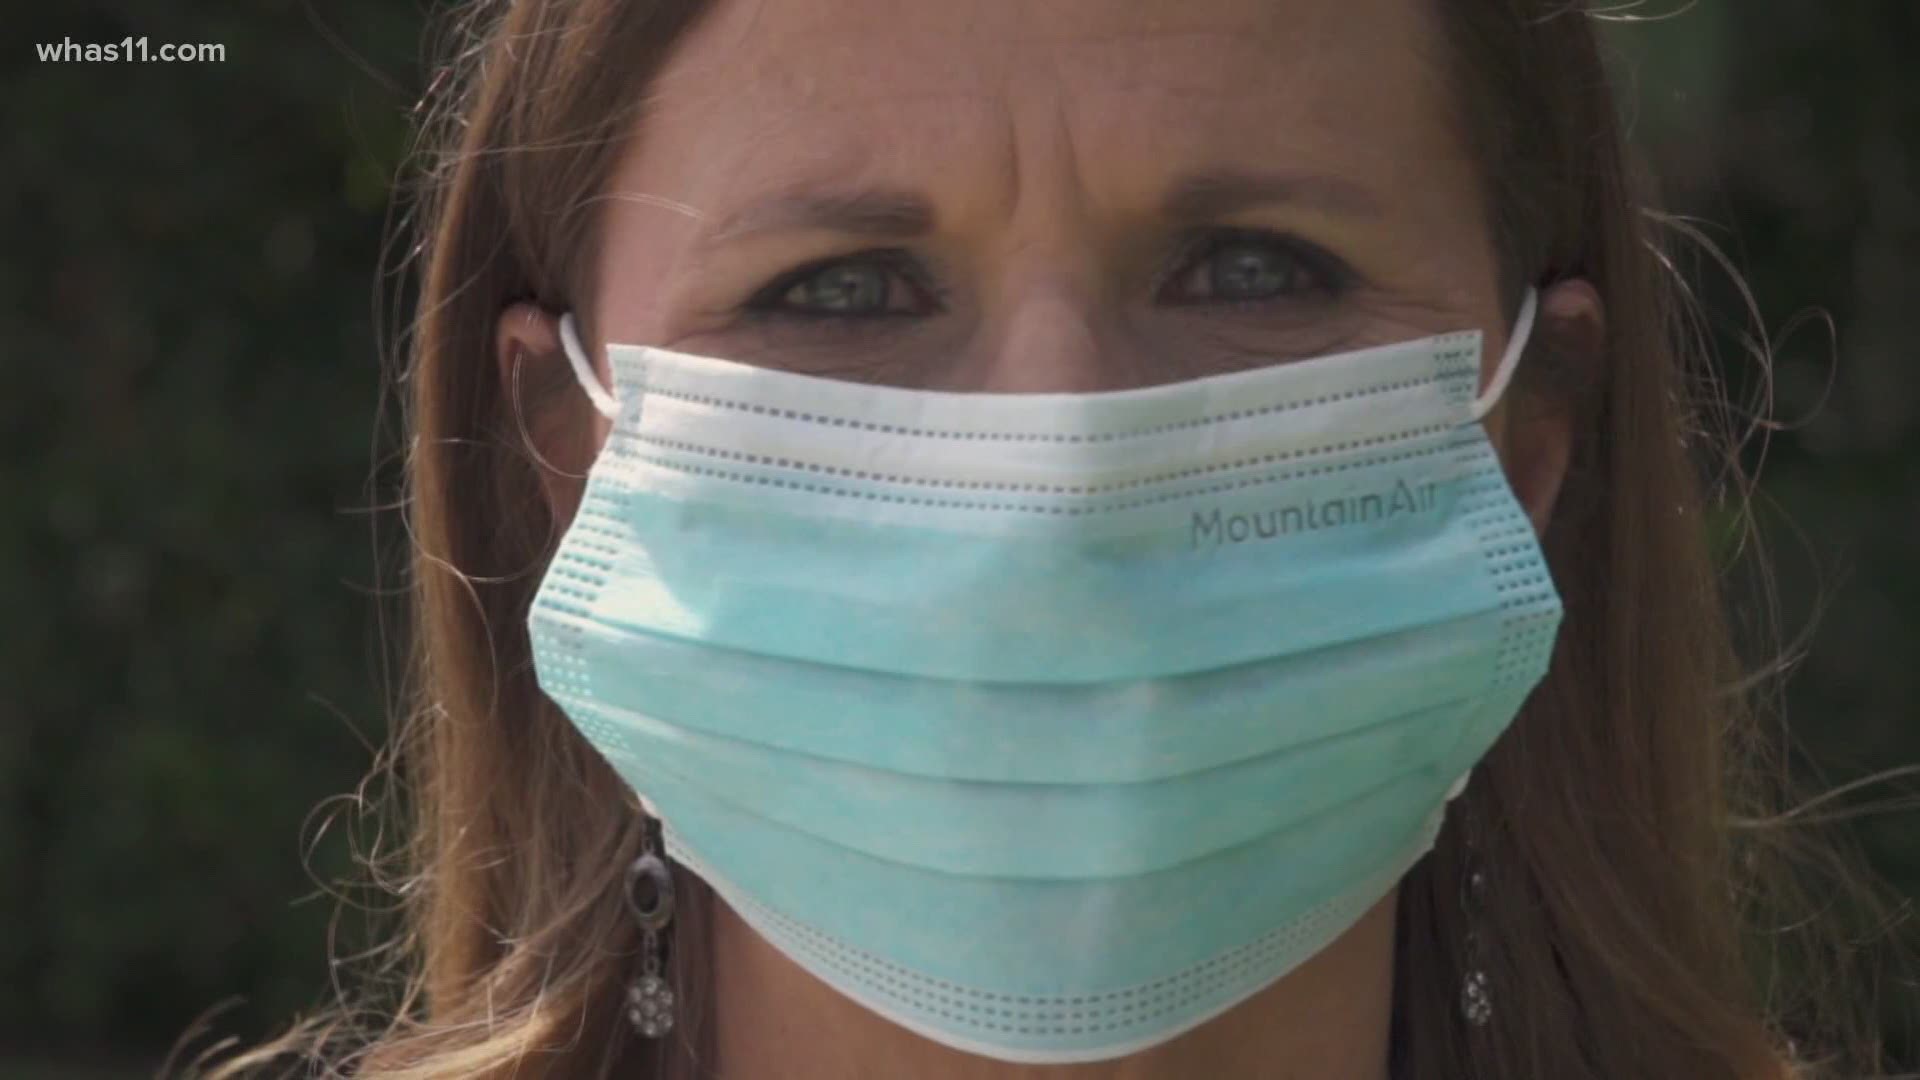 Local health departments, like the Louisville Metro Department of Public Health and Wellness, are still working on what mask enforcement will look like.